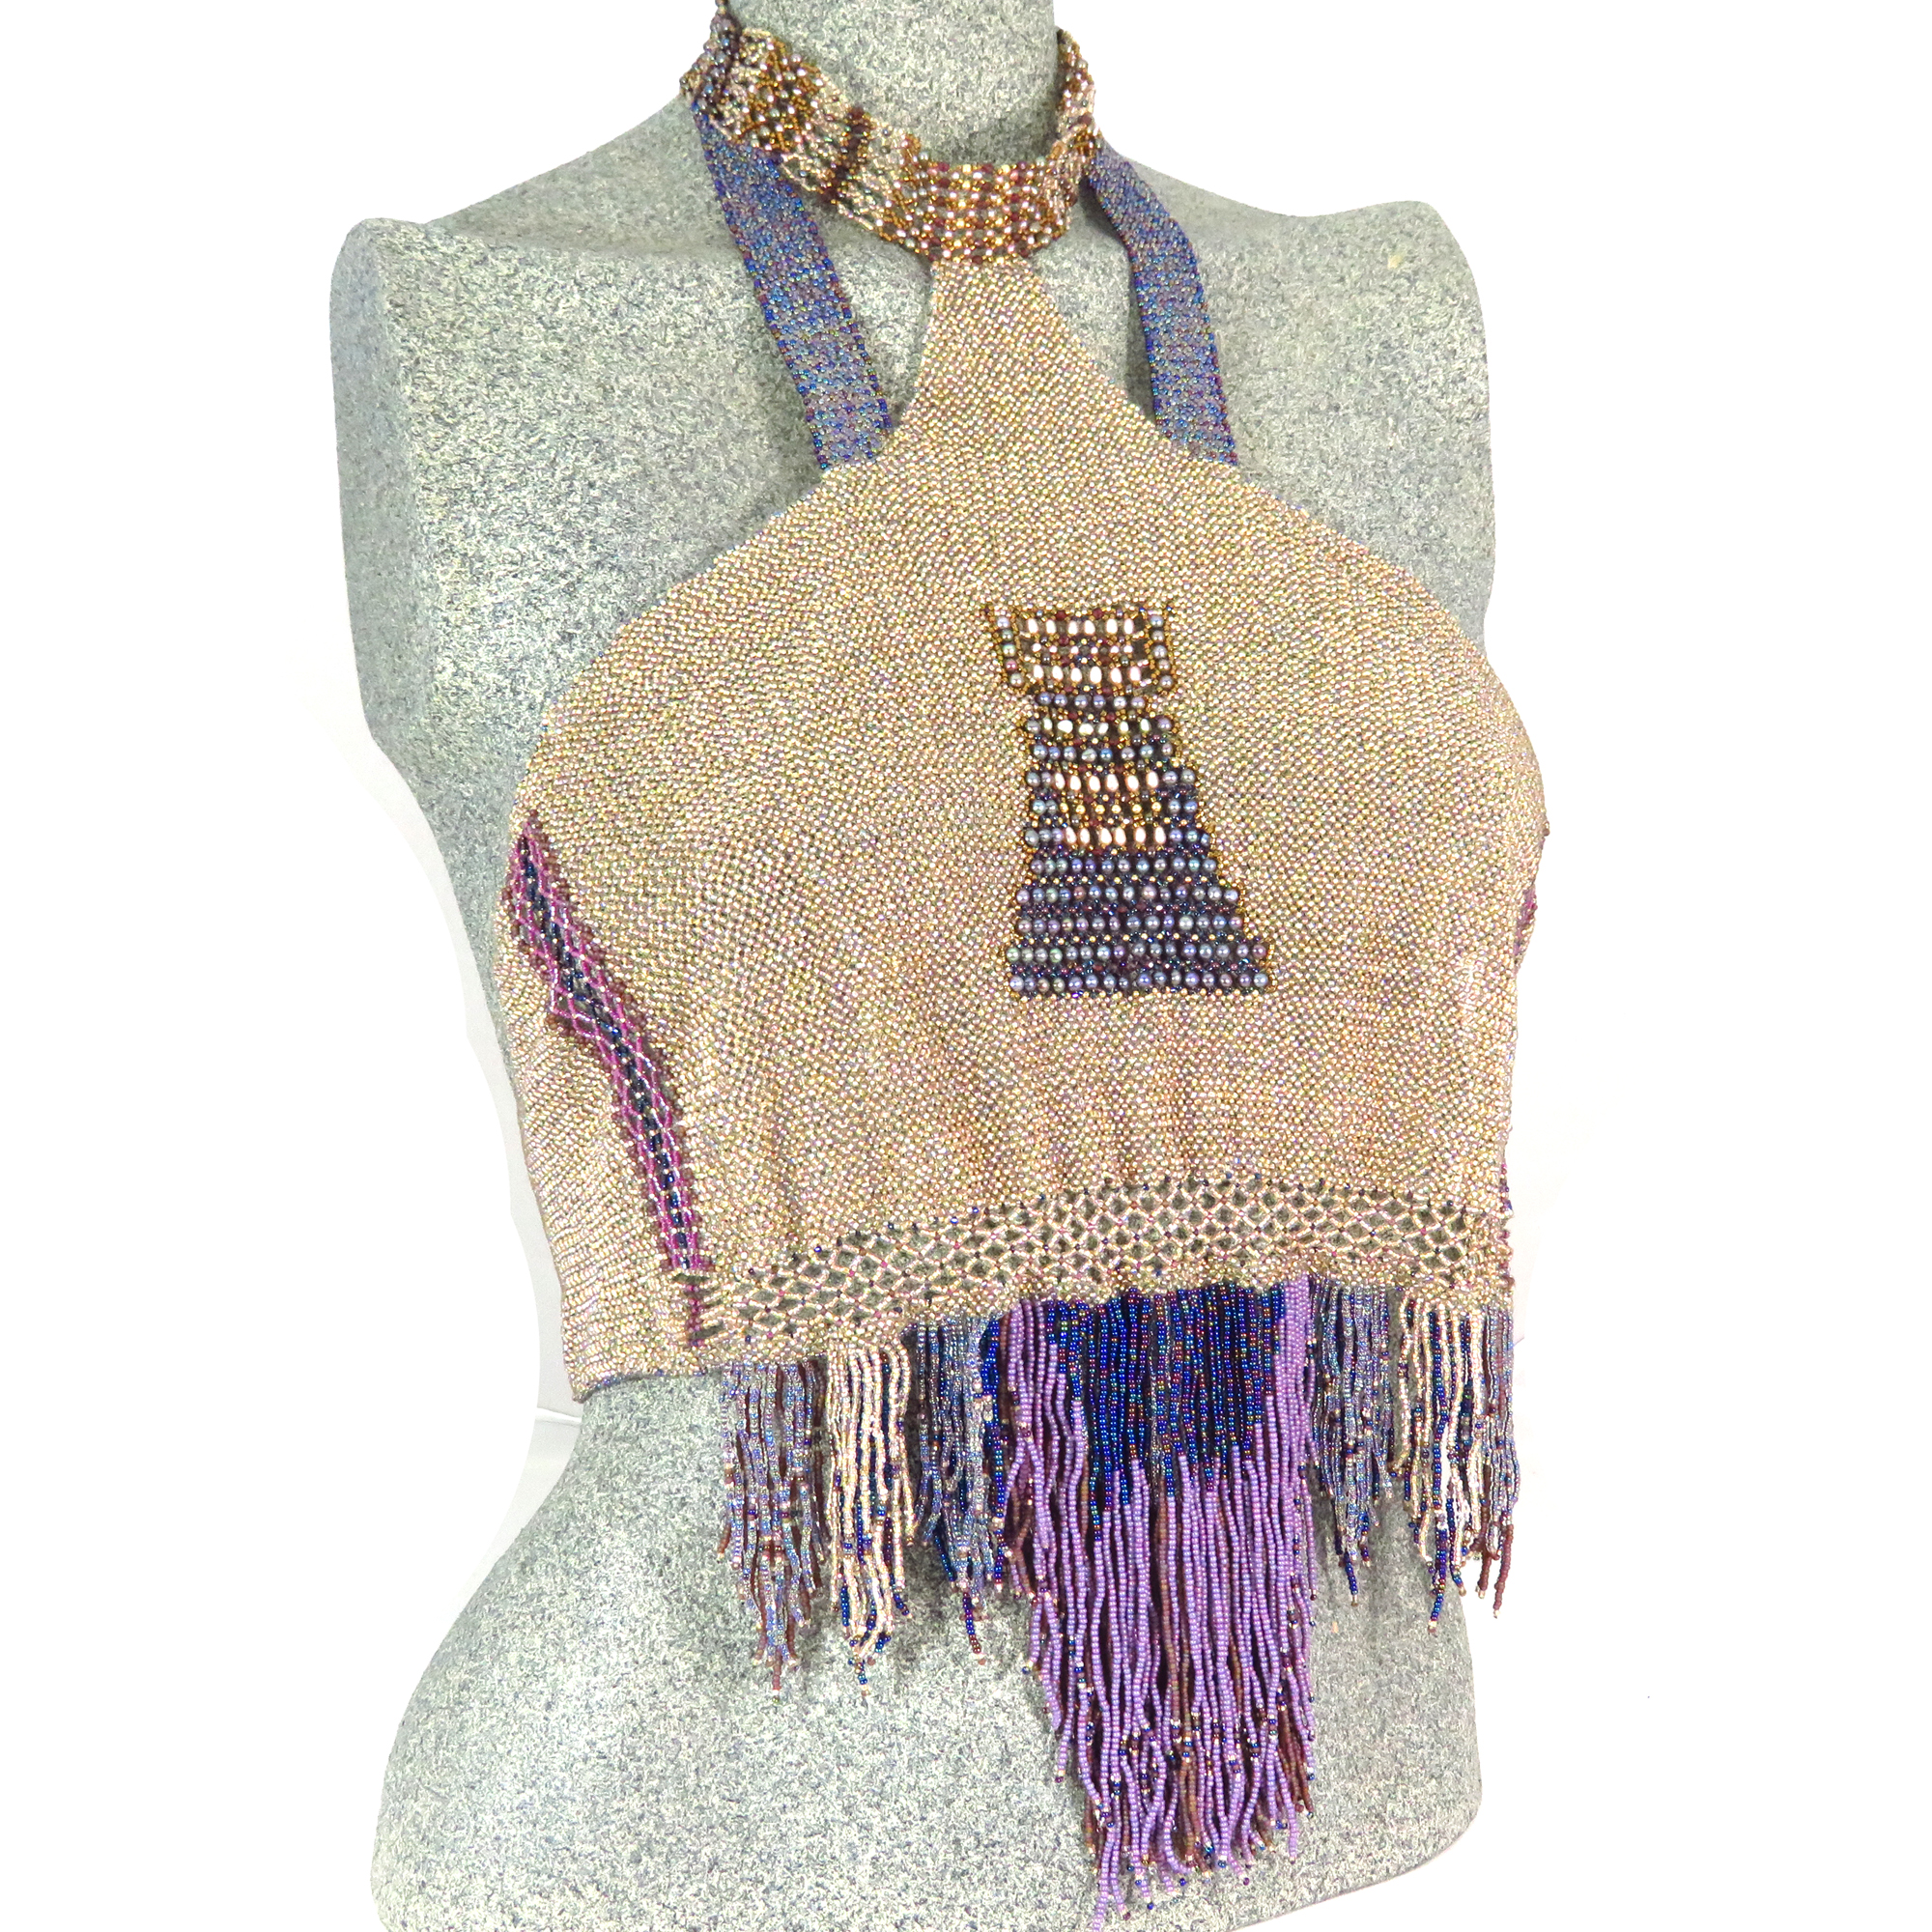 One of a kind beaded fashion, women's evening top, artisan clothing by Bonnie Van Hall